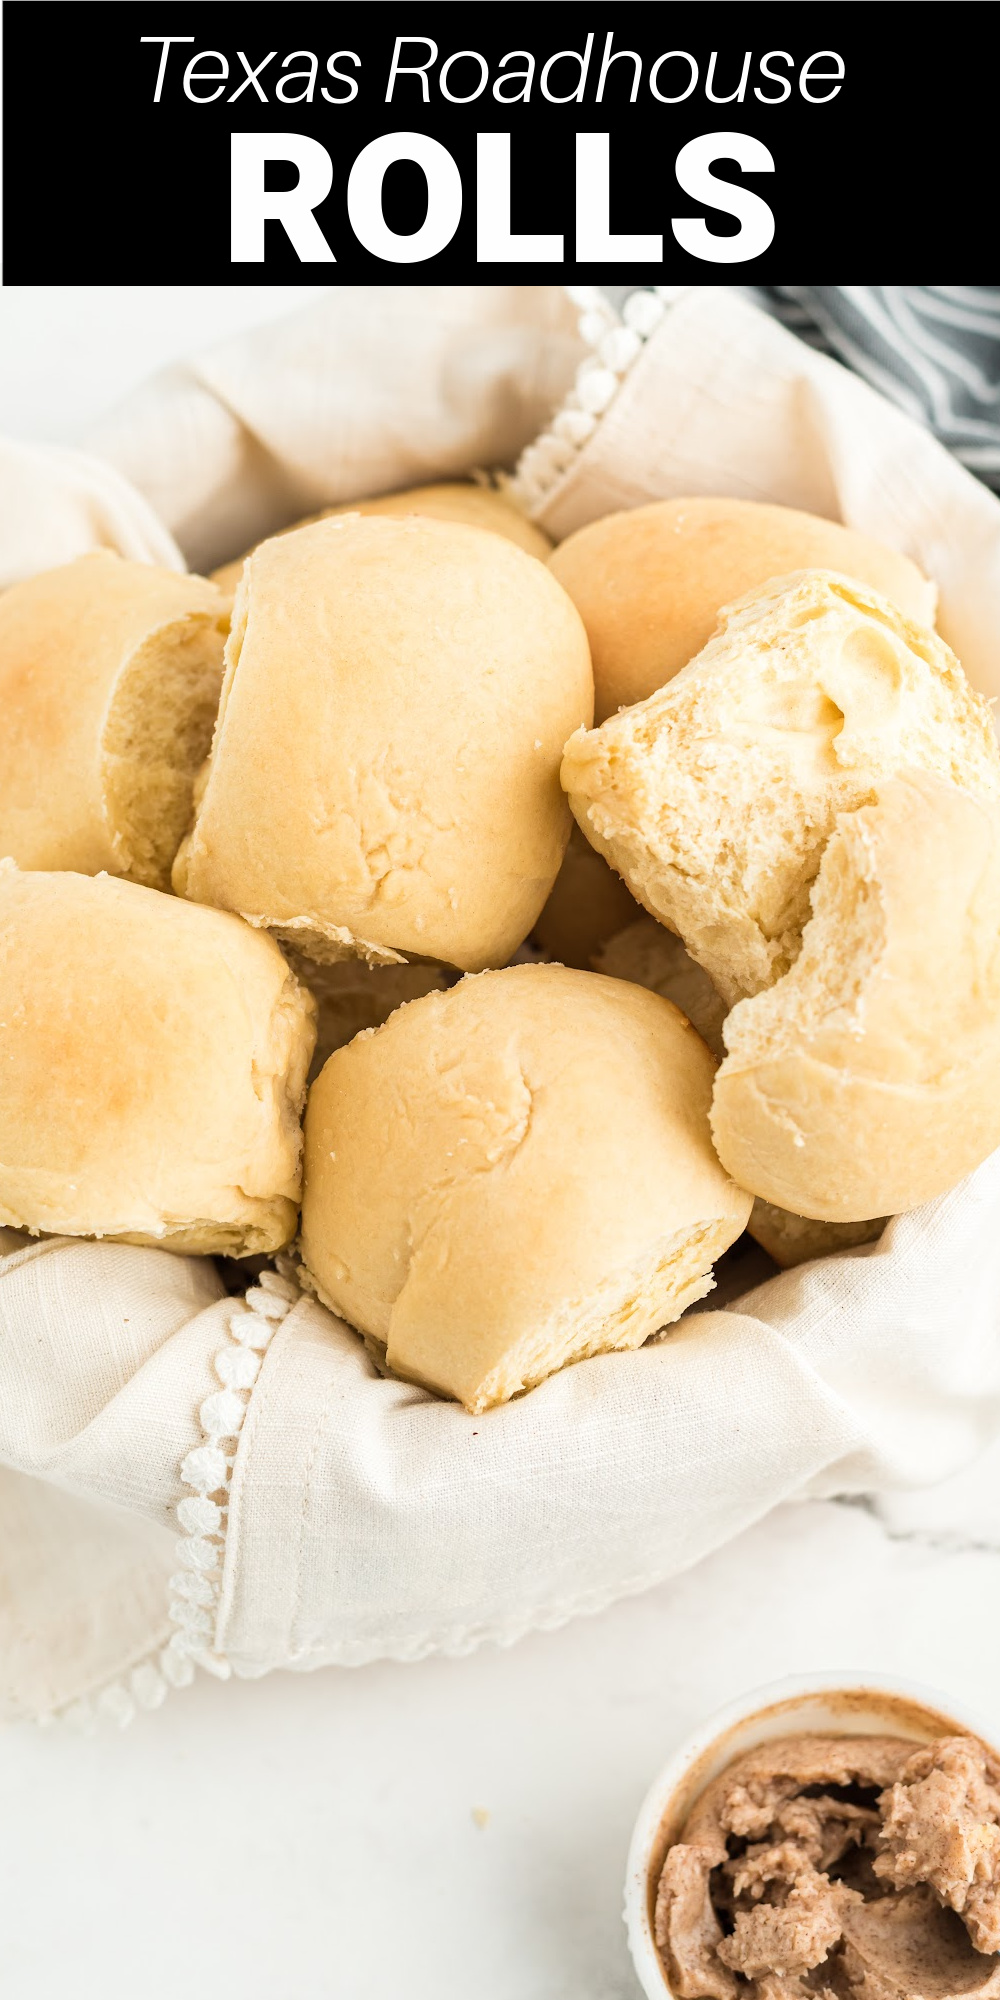 We all know that everyone loves the Texas Roadhouse Rolls and their cinnamon butter and now you can recreate these warm, buttery rolls at home. The Texas Roadhouse rolls recipe is an easy copycat recipe.